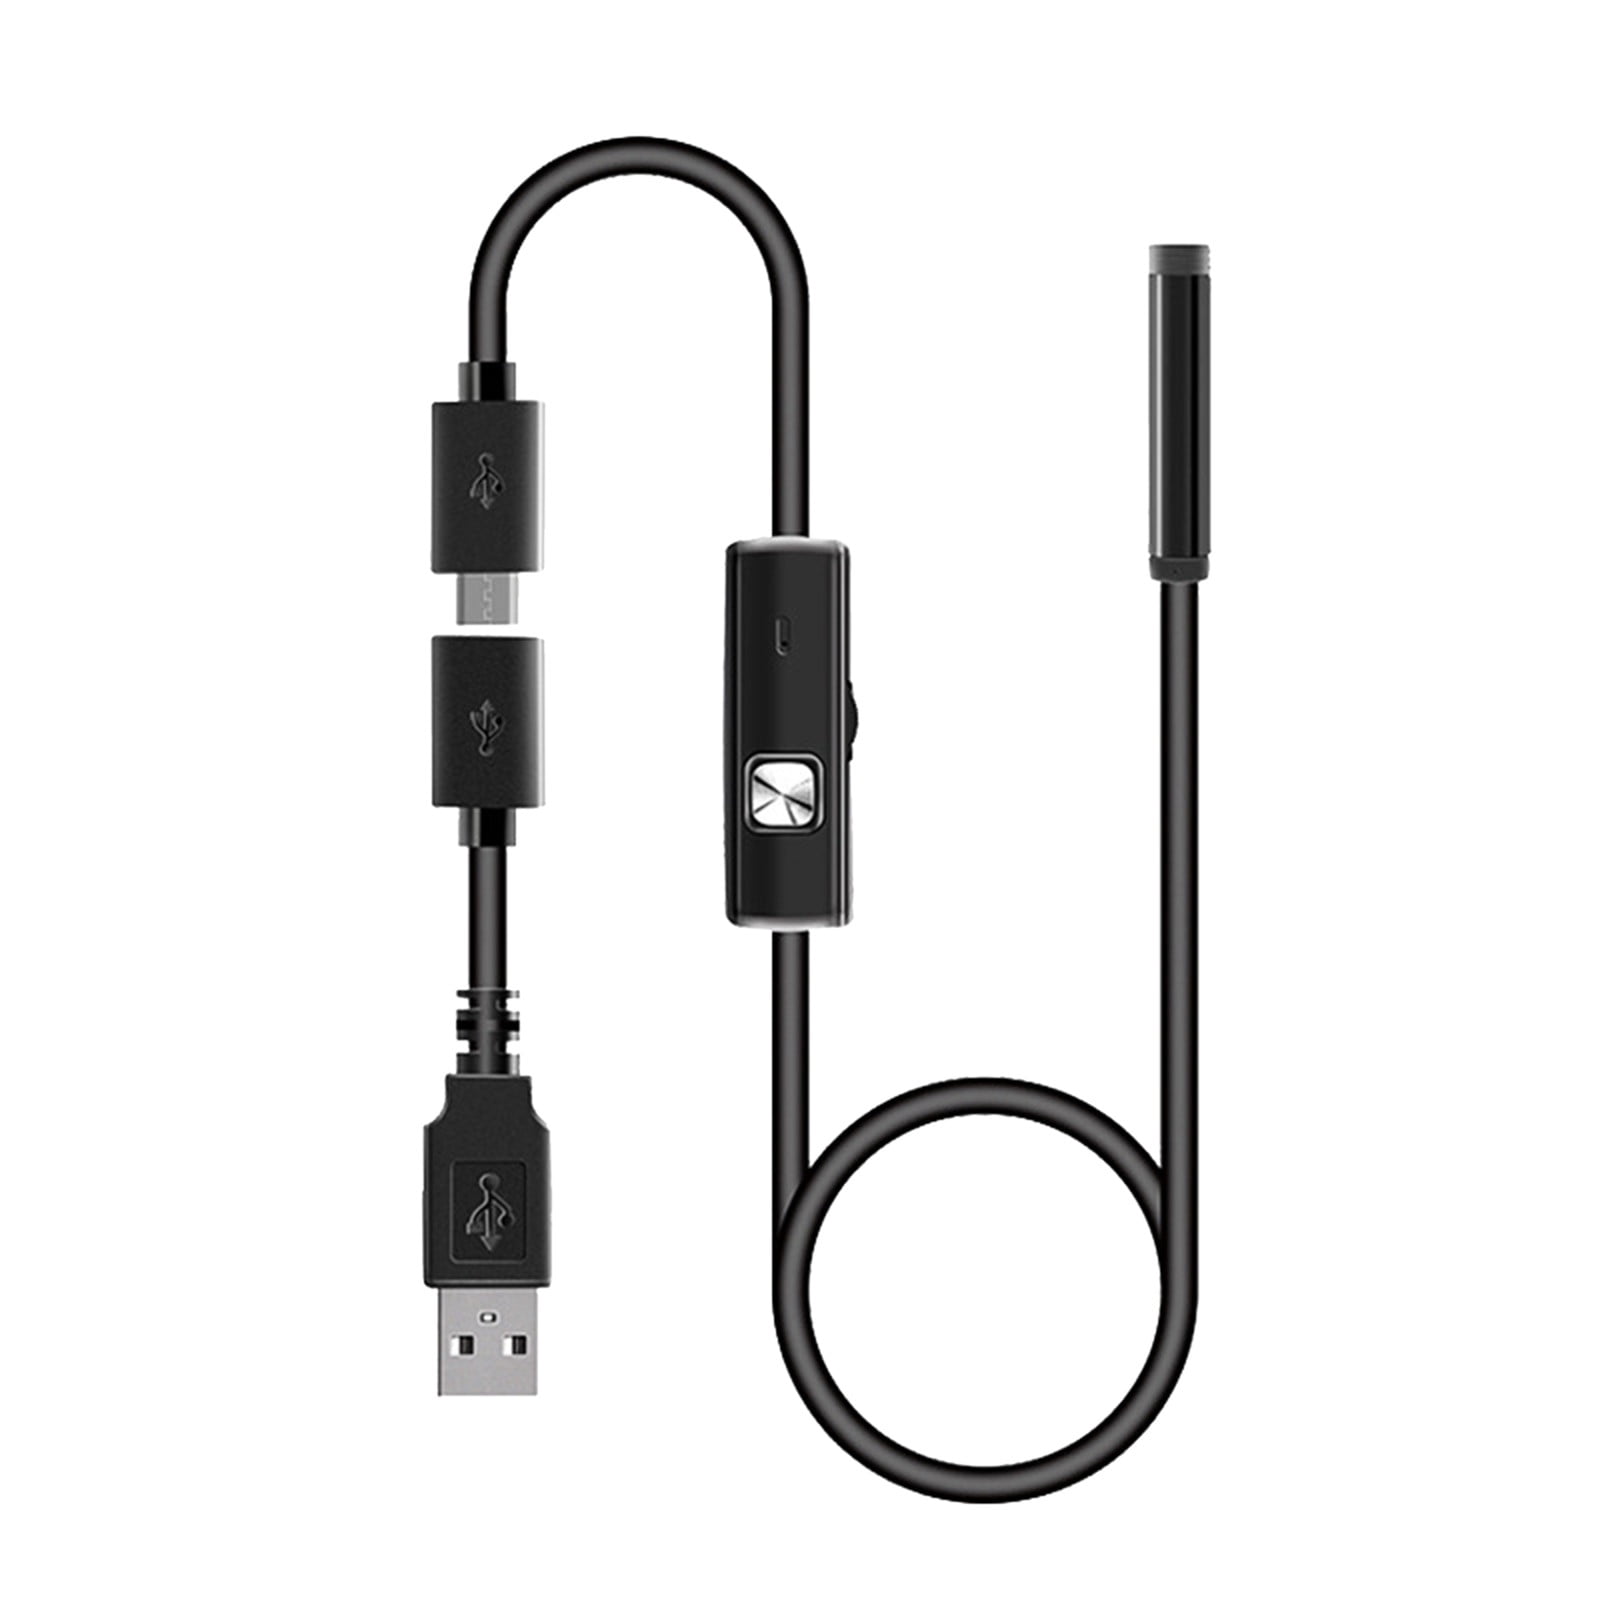 Camera For Computer7mm Hd Endoscope Camera With Led - Waterproof Usb  Inspection For Android & Pc